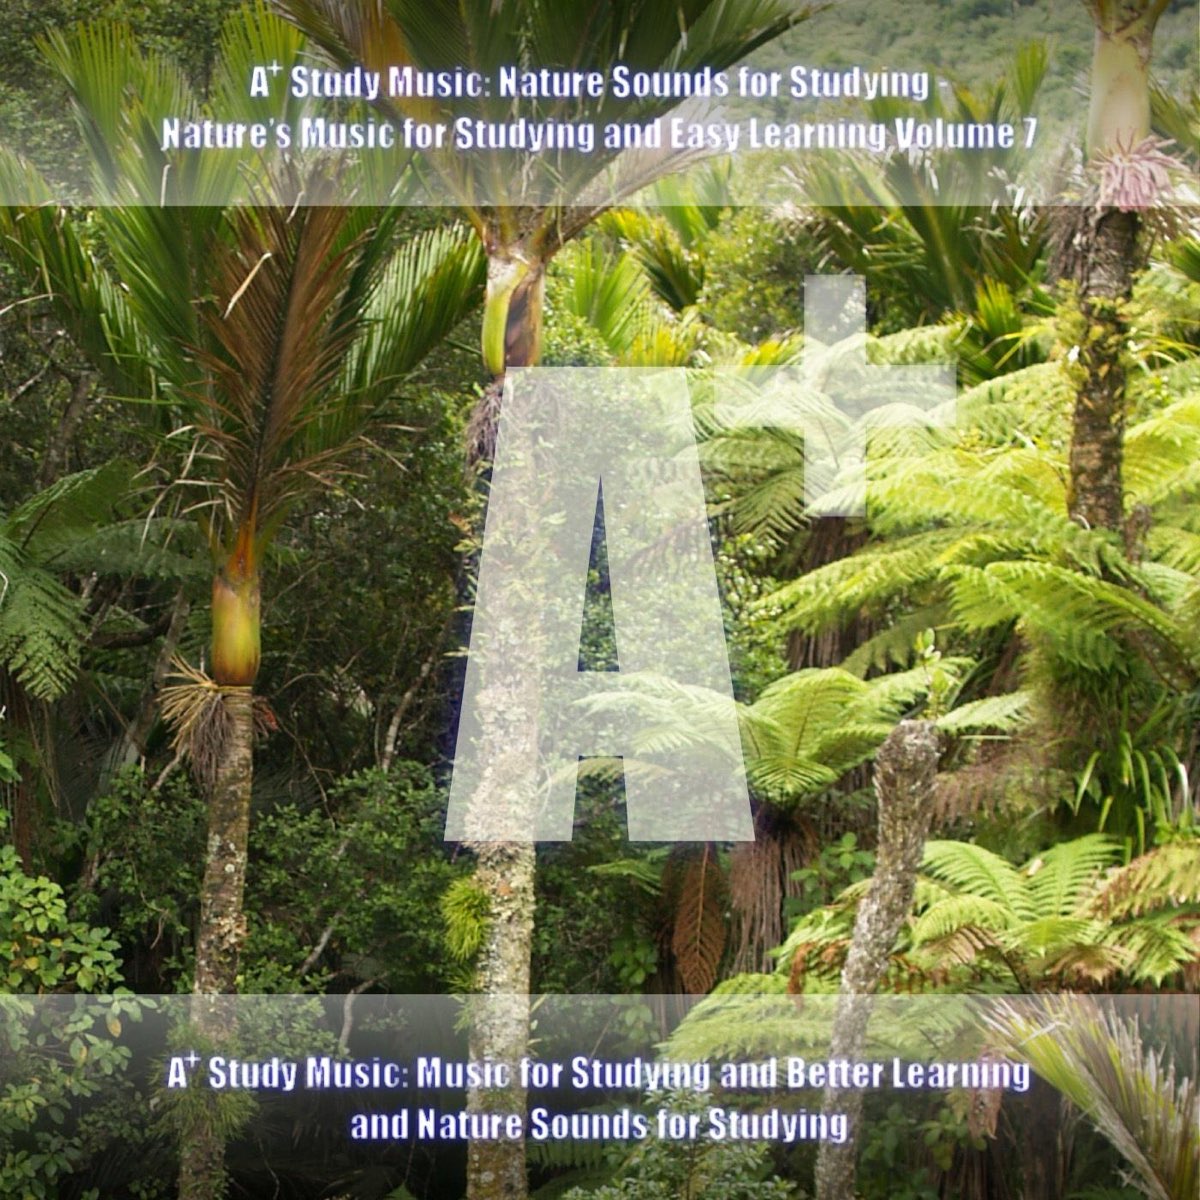 A+ Study Music: Nature Sounds Studying - Nature's Music for Studying and Easy Learning Volume 7 by A+ Study on Apple Music